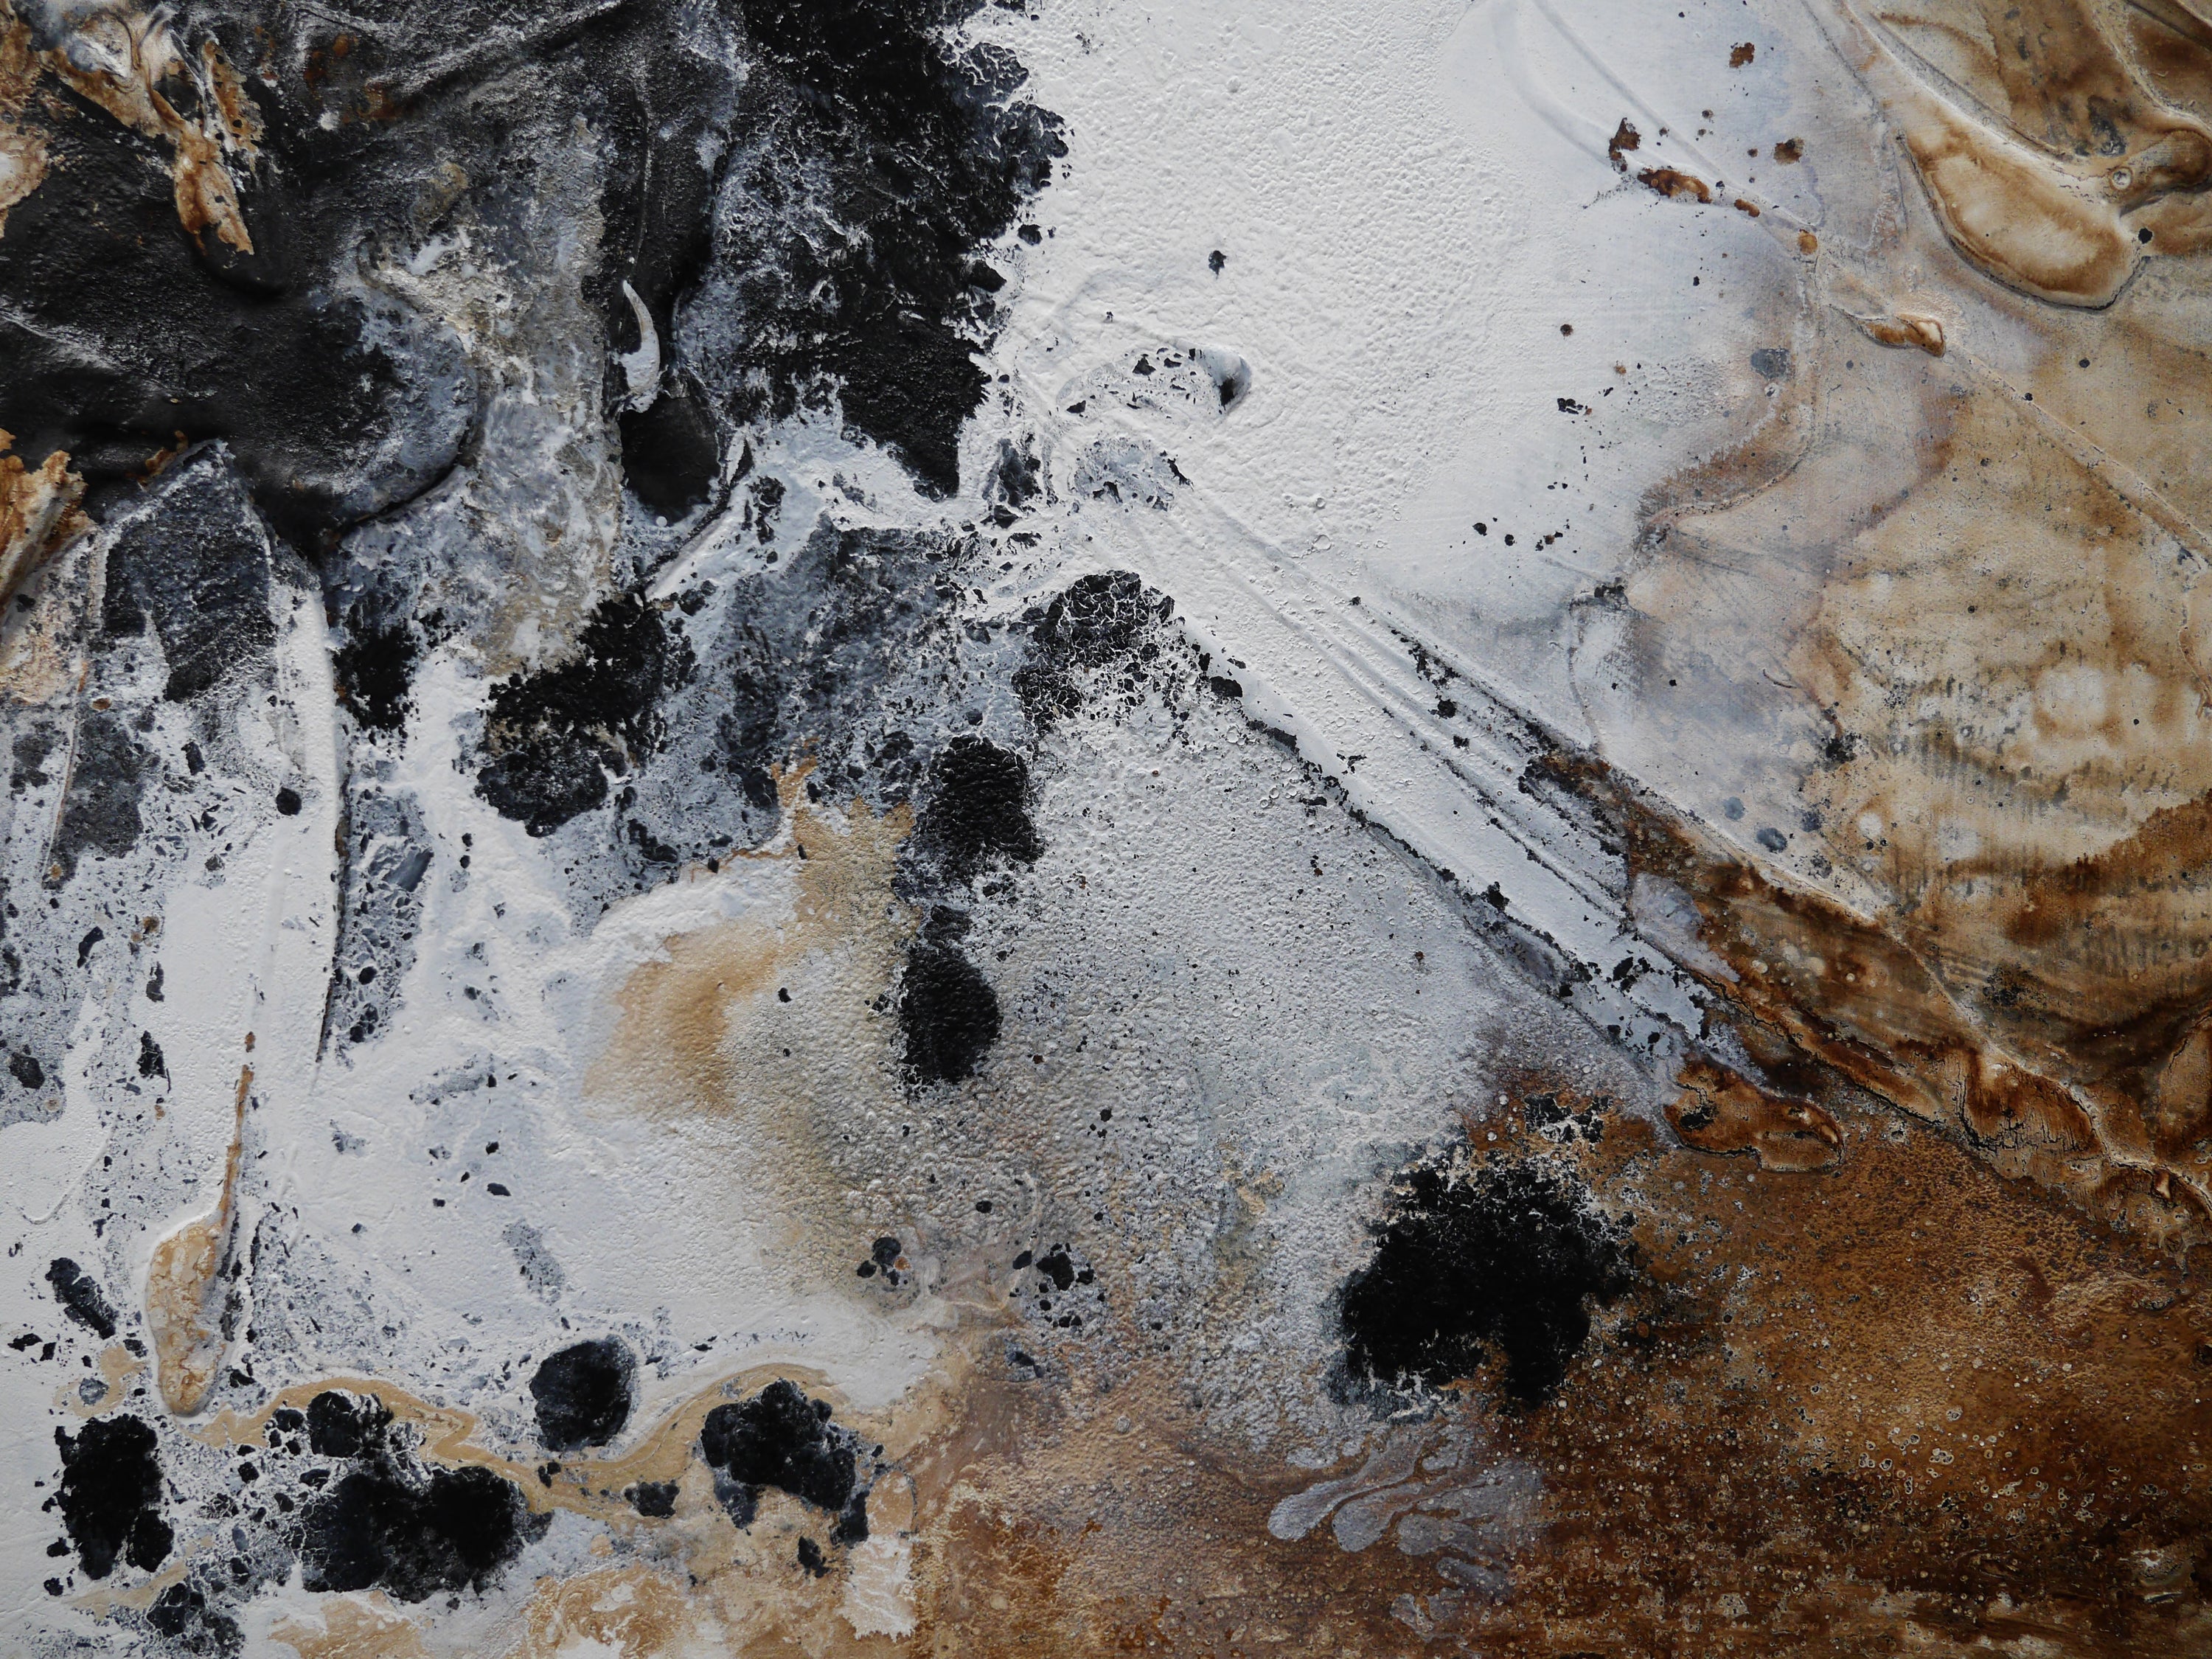 Lunar 190cm x 100cm Rusts Blacks Slates White Textured Abstract Painting (SOLD)